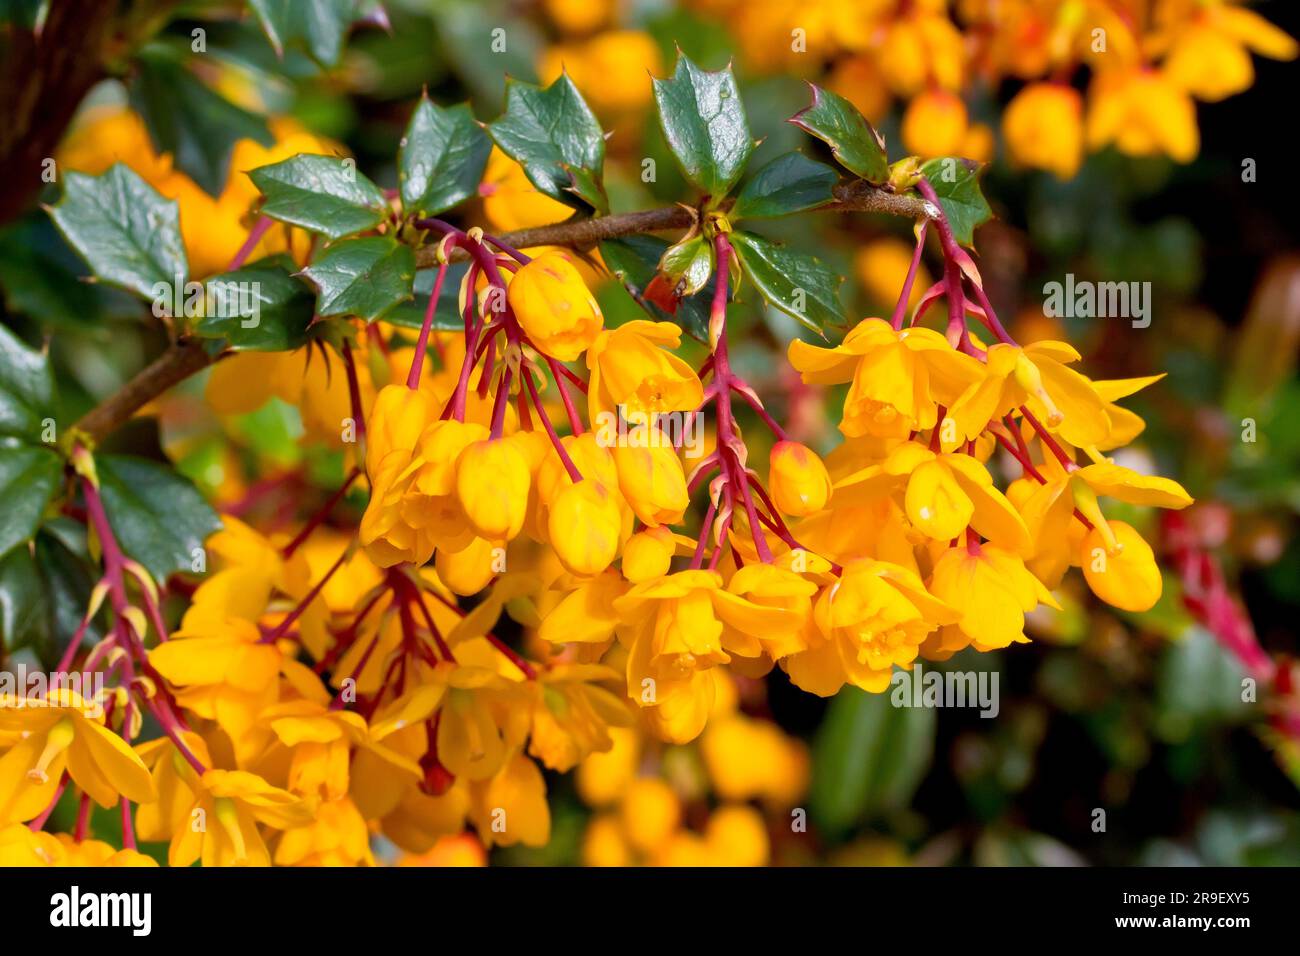 Darwin's Barberry (berberis darwinii), close of of the yellow/orange flowers of the ornamental shrub commonly planted in gardens and public parks. Stock Photo